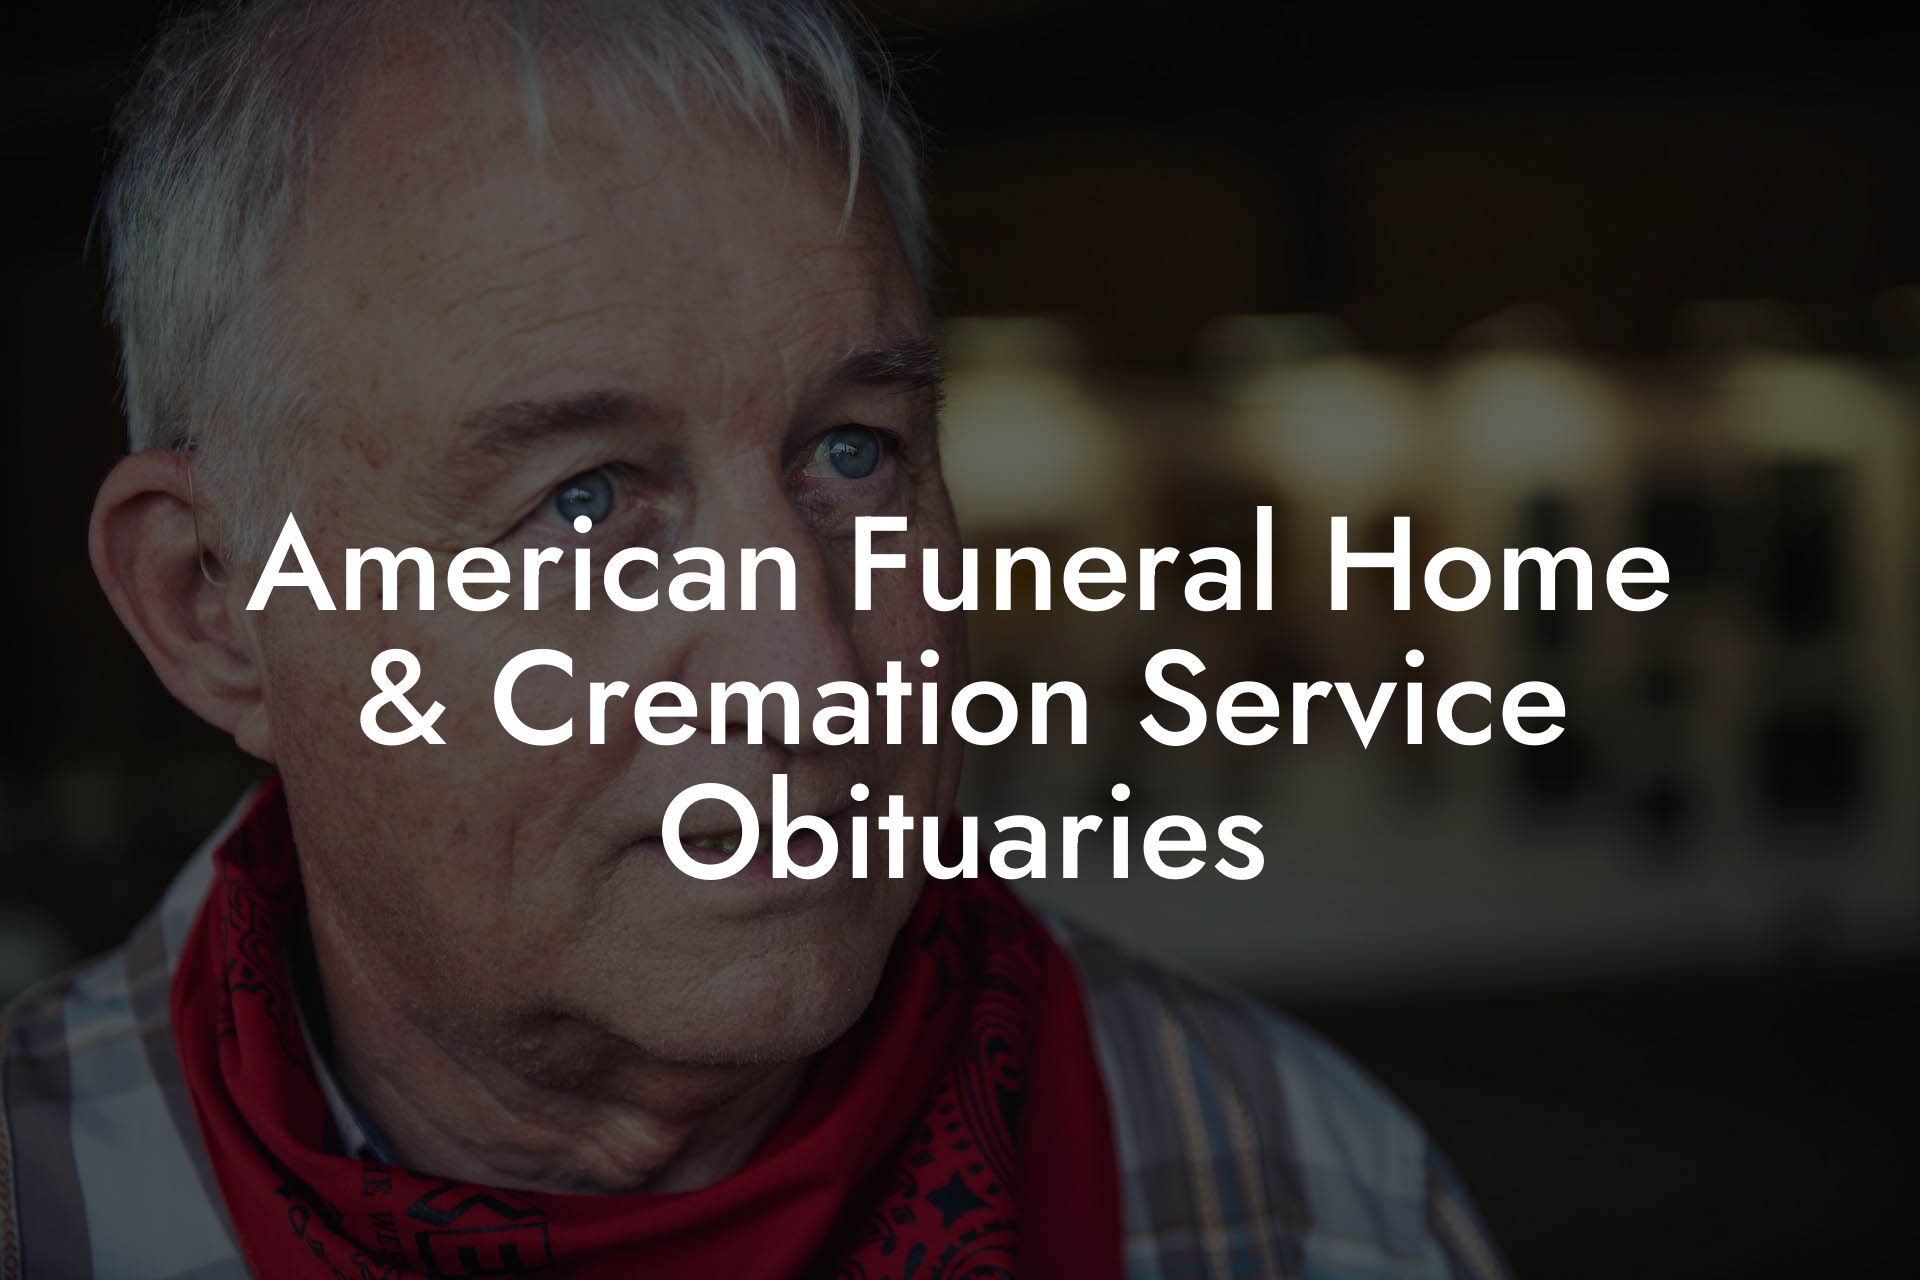 American Funeral Home & Cremation Service Obituaries